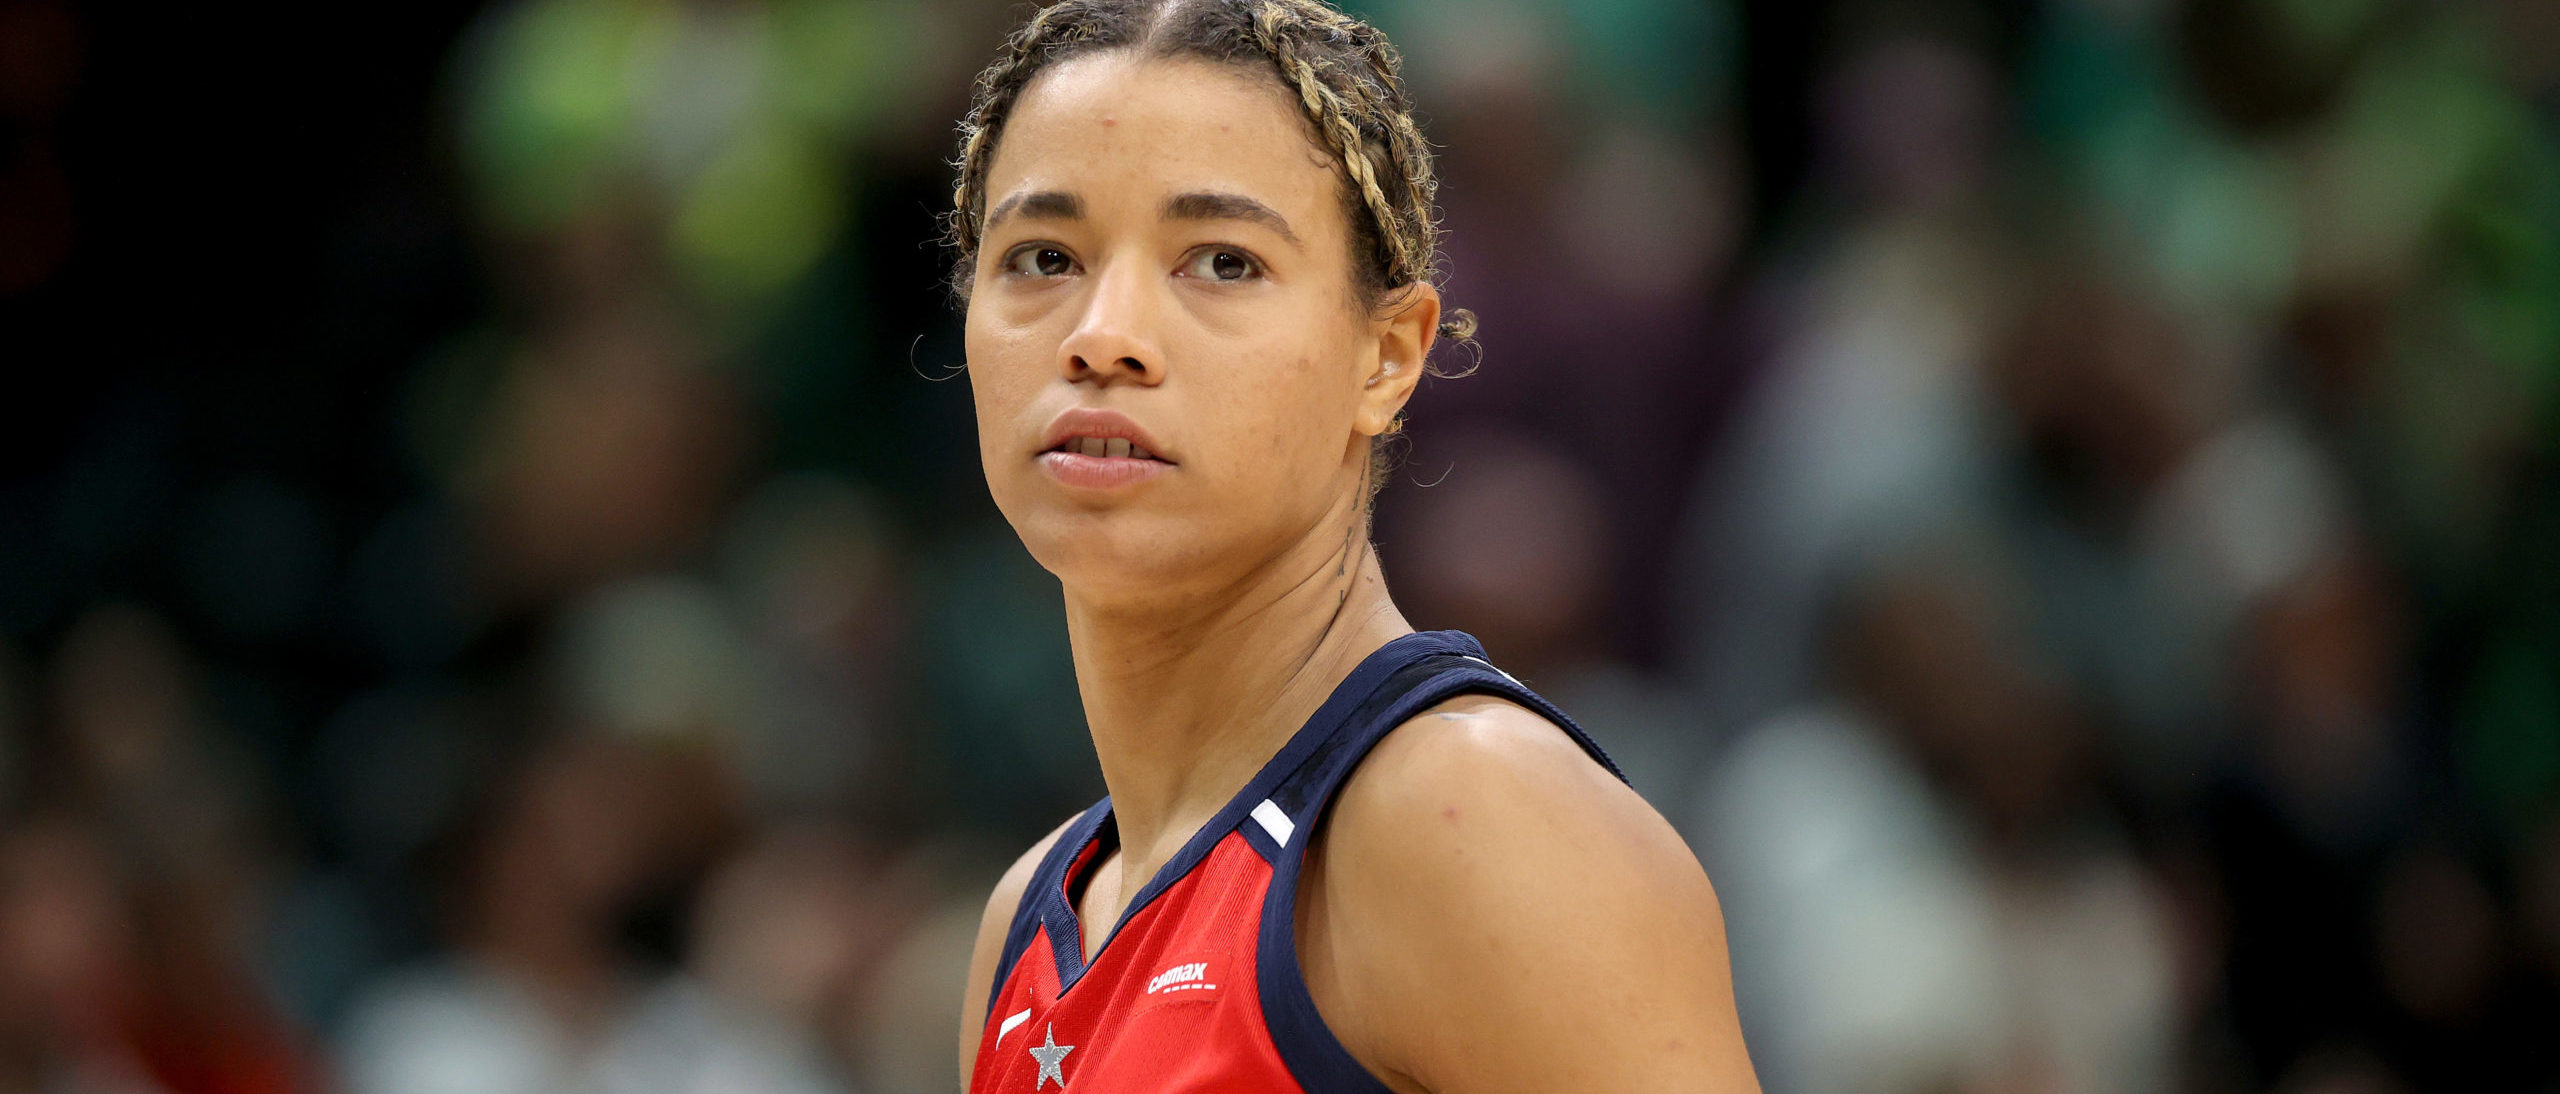 ‘Shut The F**k Up’: WNBA Star Natasha Cloud Lashes Out And Ridiculously ...